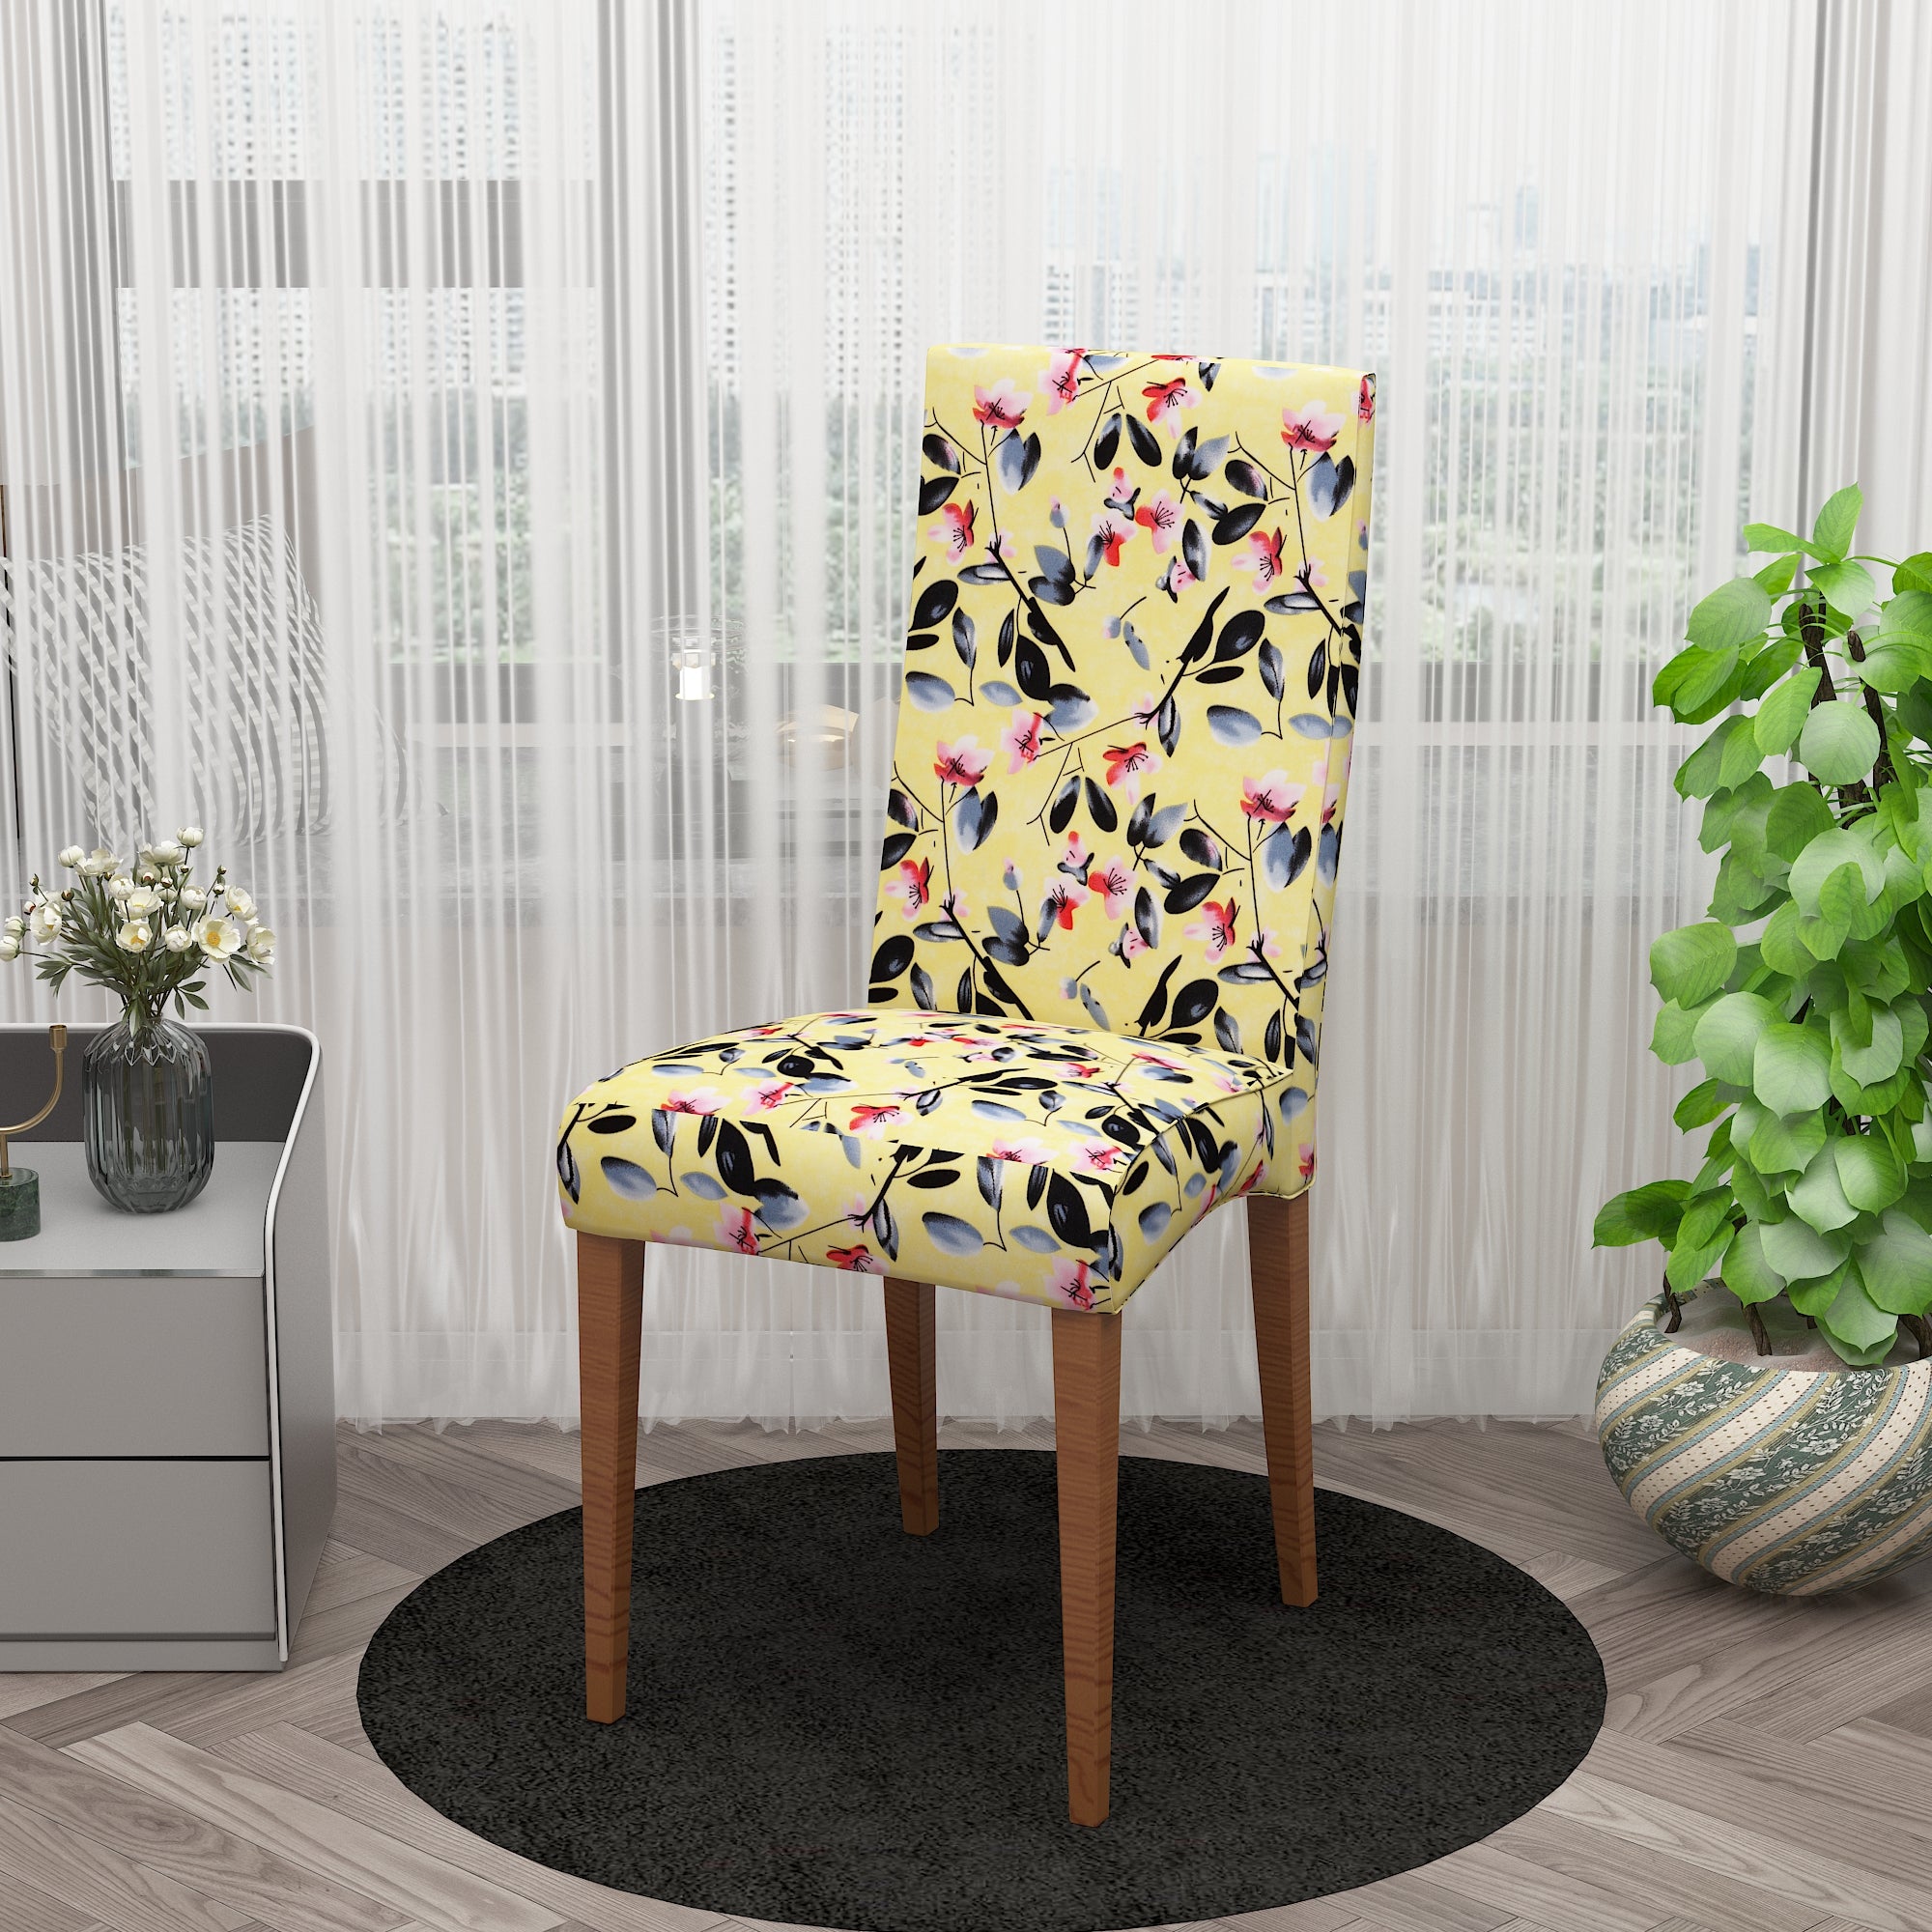 Polyester Spandex Stretchable Printed Chair Cover, MG10